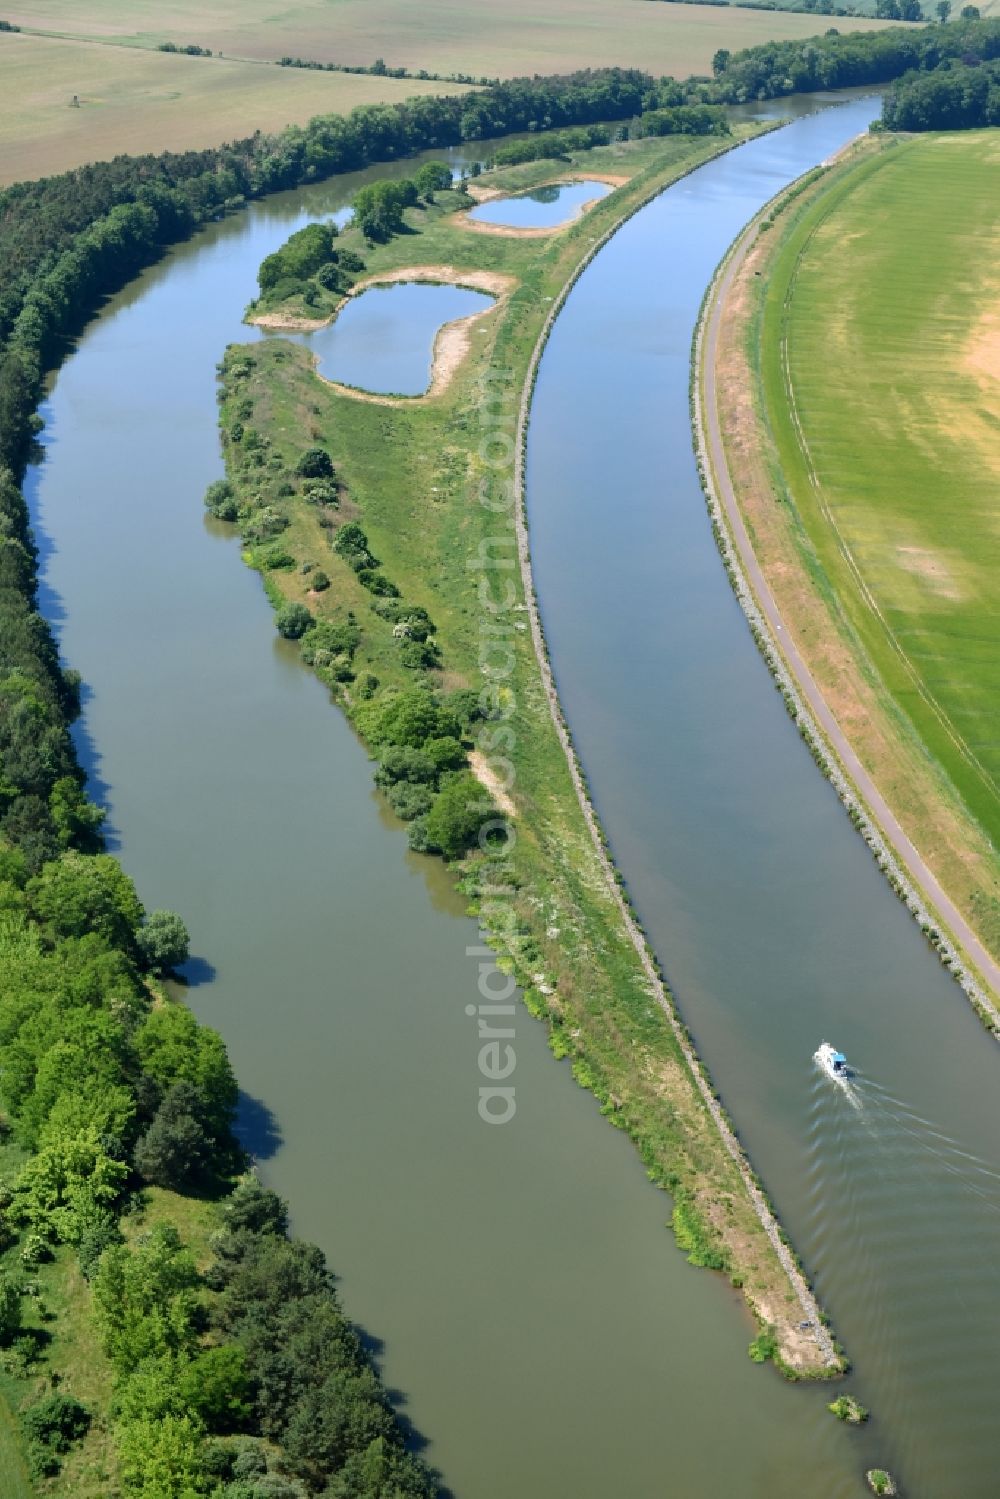 Seedorf from the bird's eye view: Island Seedorf in the Elbe-Havel-Canal near Nielebock-Seedorf in the state Saxony-Anhalt